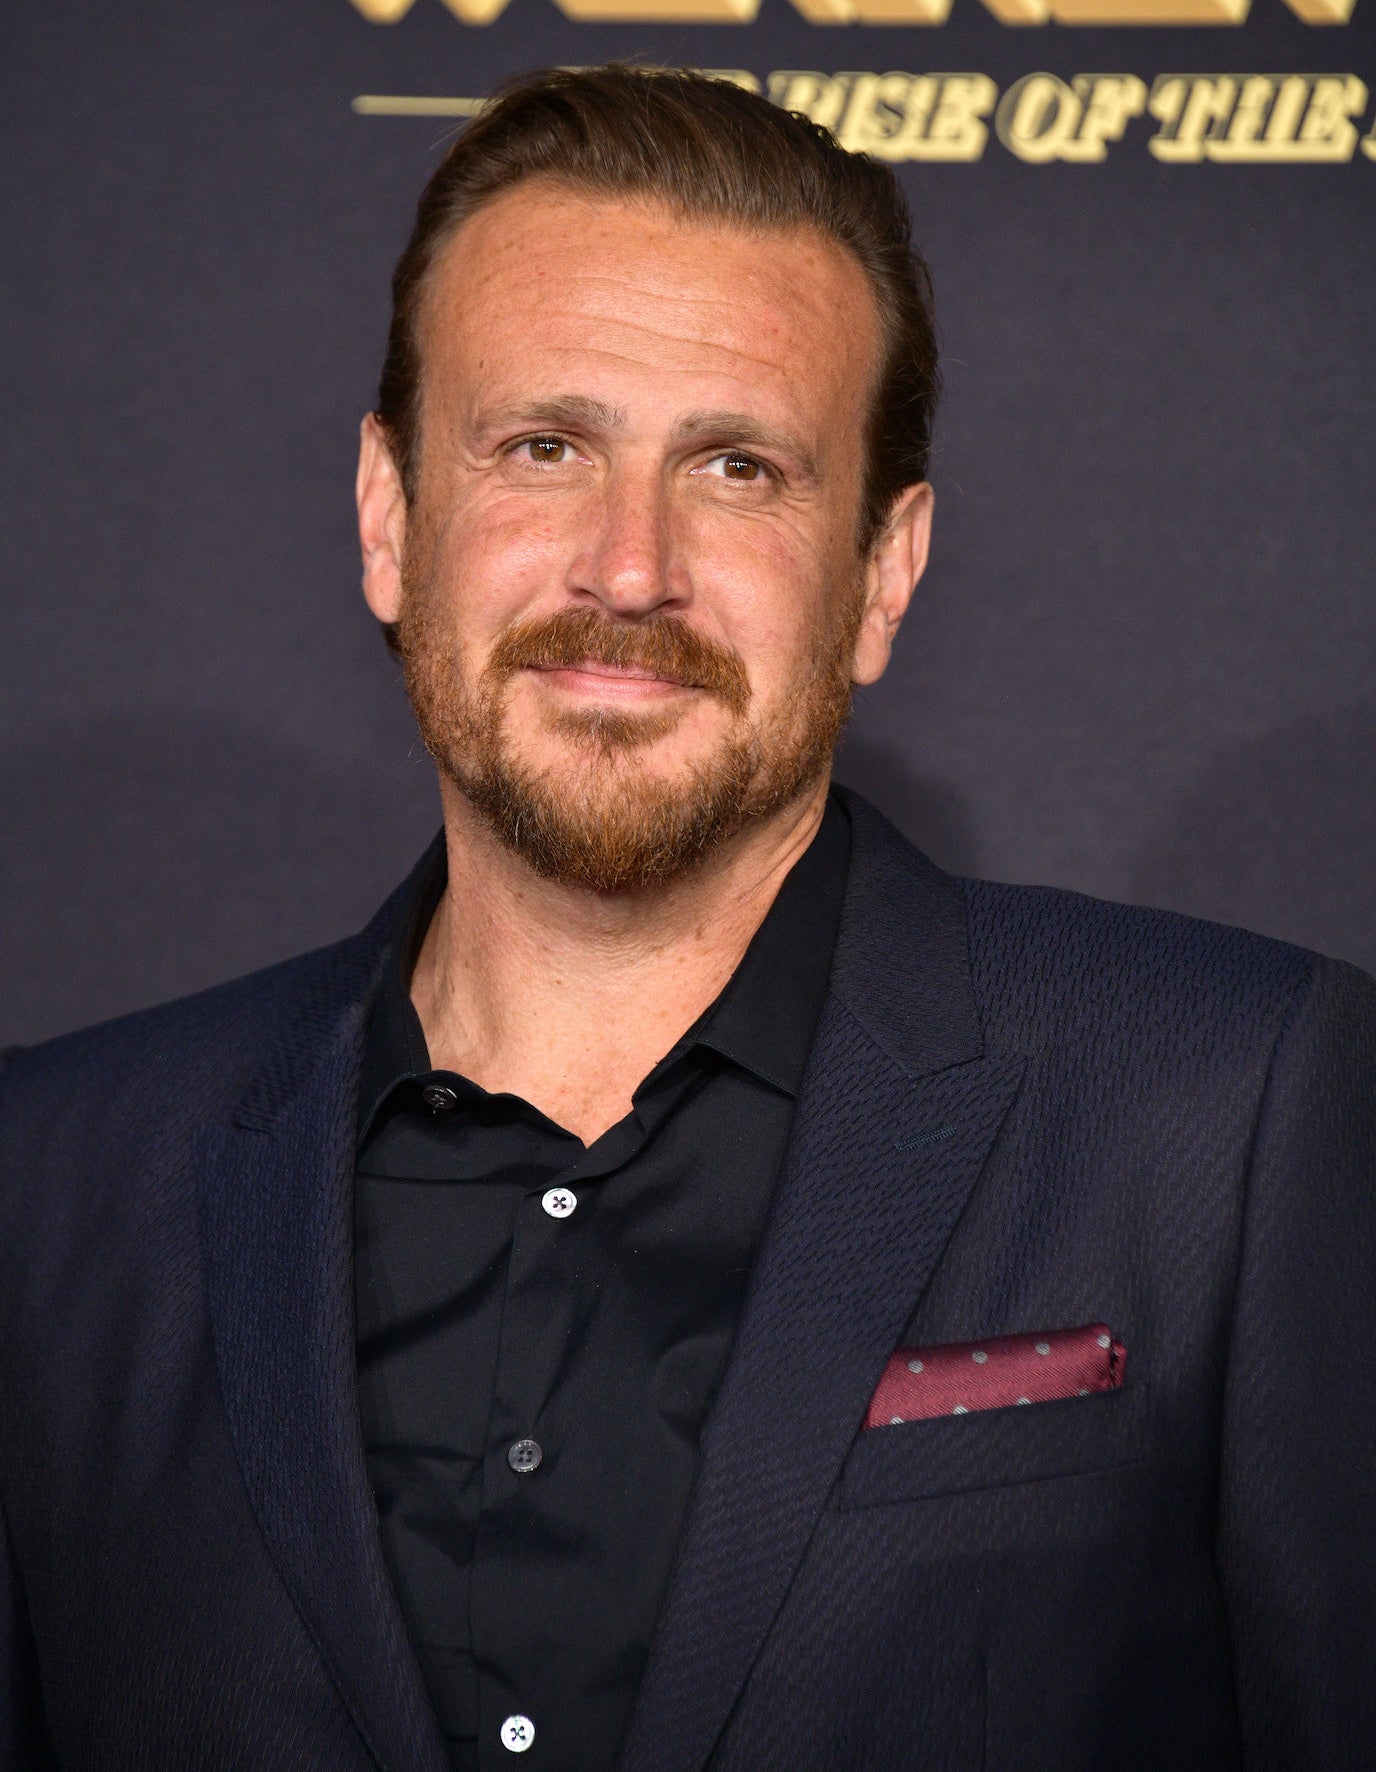 Jason Segal smiling at an event